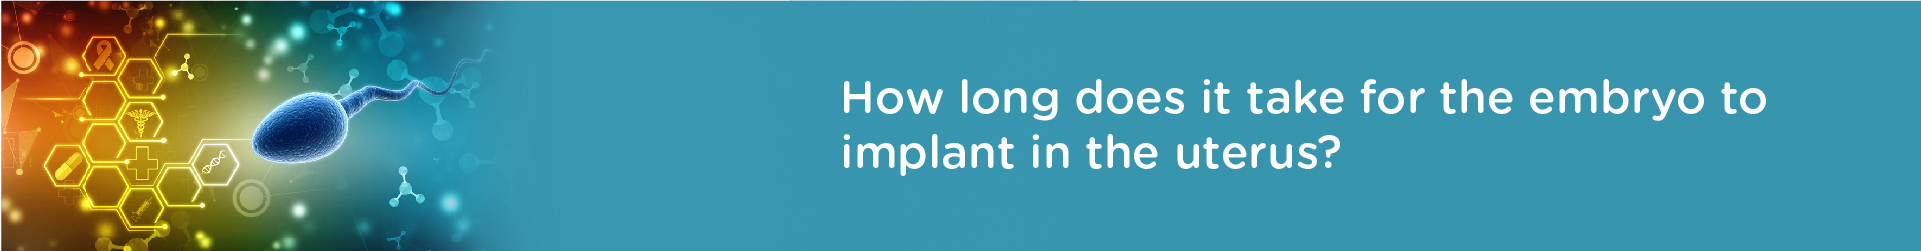 How long does it take for the embryo to implant in the uterus?